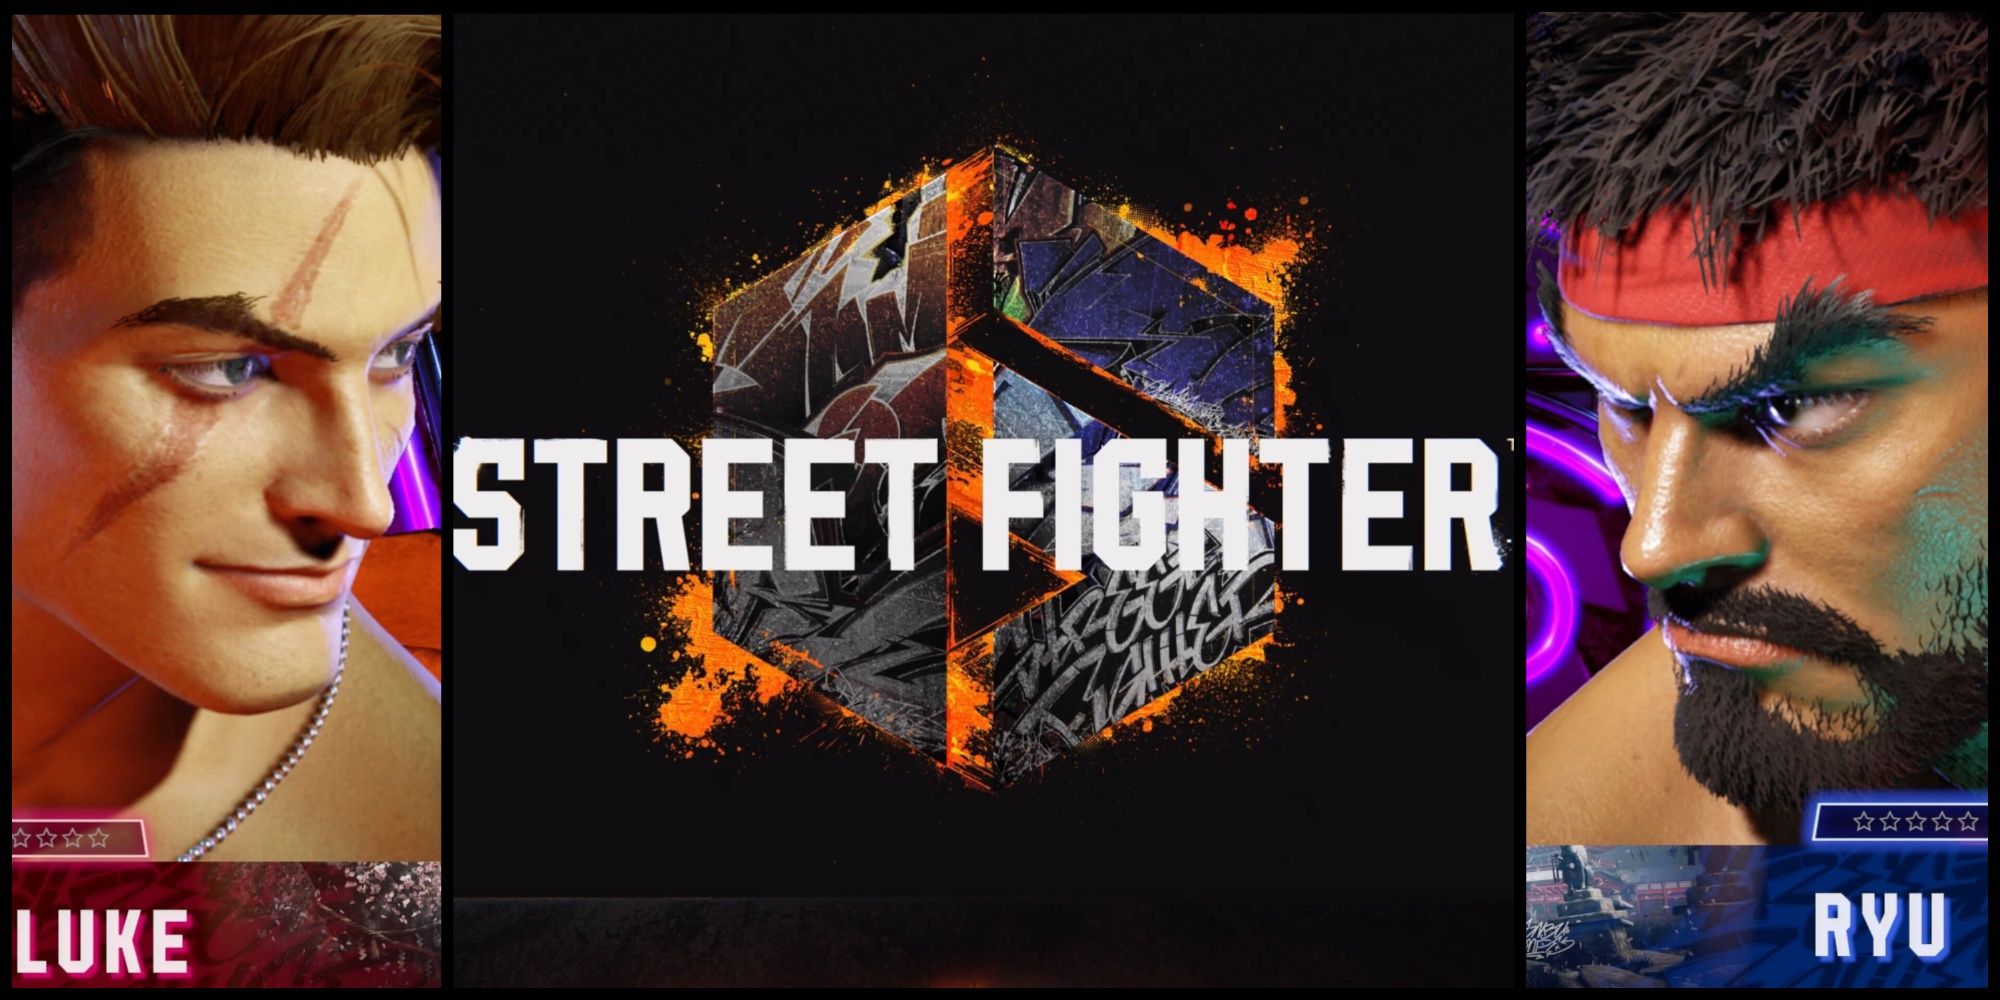 The title for Street Fighter 6 alongside characters Luke and Ryu